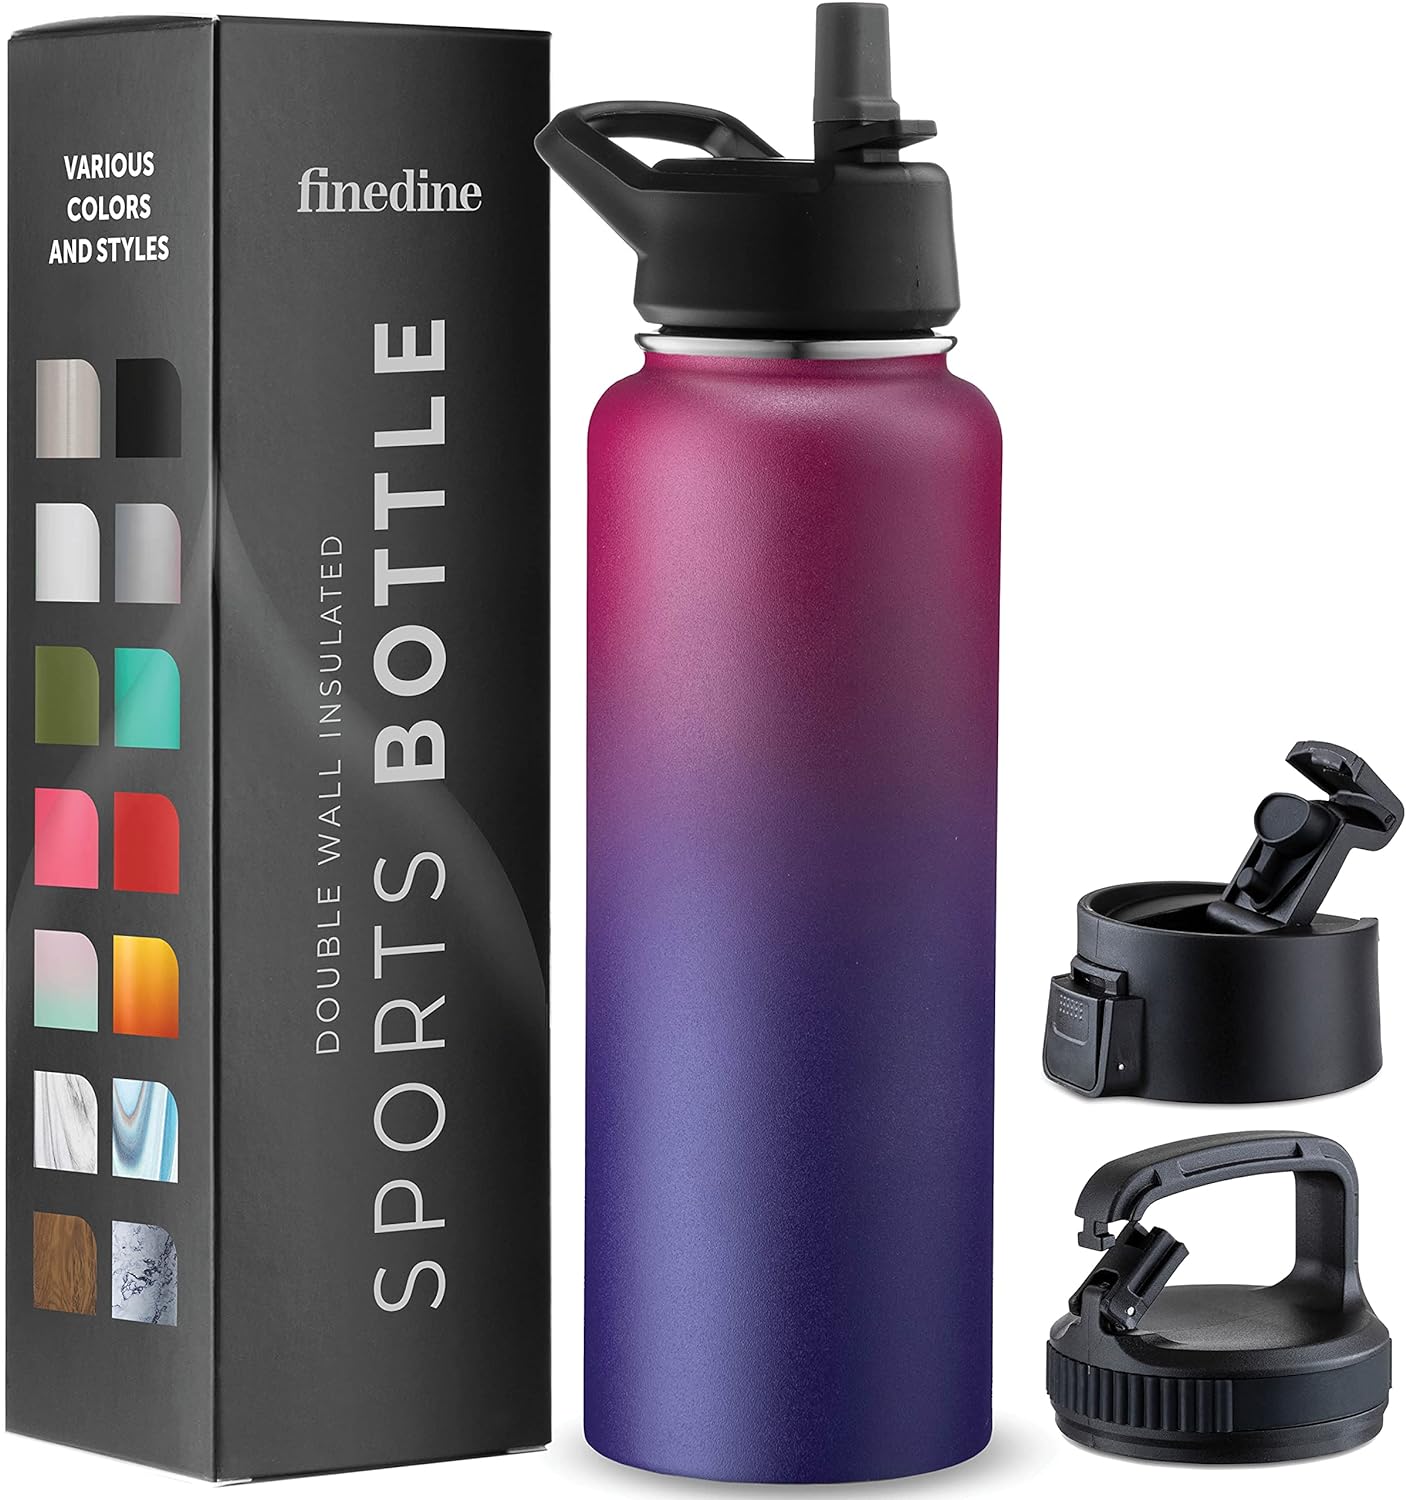 FineDine Insulated Water Bottles with Straw - 40 Oz Stainless Steel Metal Water Bottle W/ 3 Lids - Reusable for Travel, Camping, Bike, Sports - Dreamy Purple